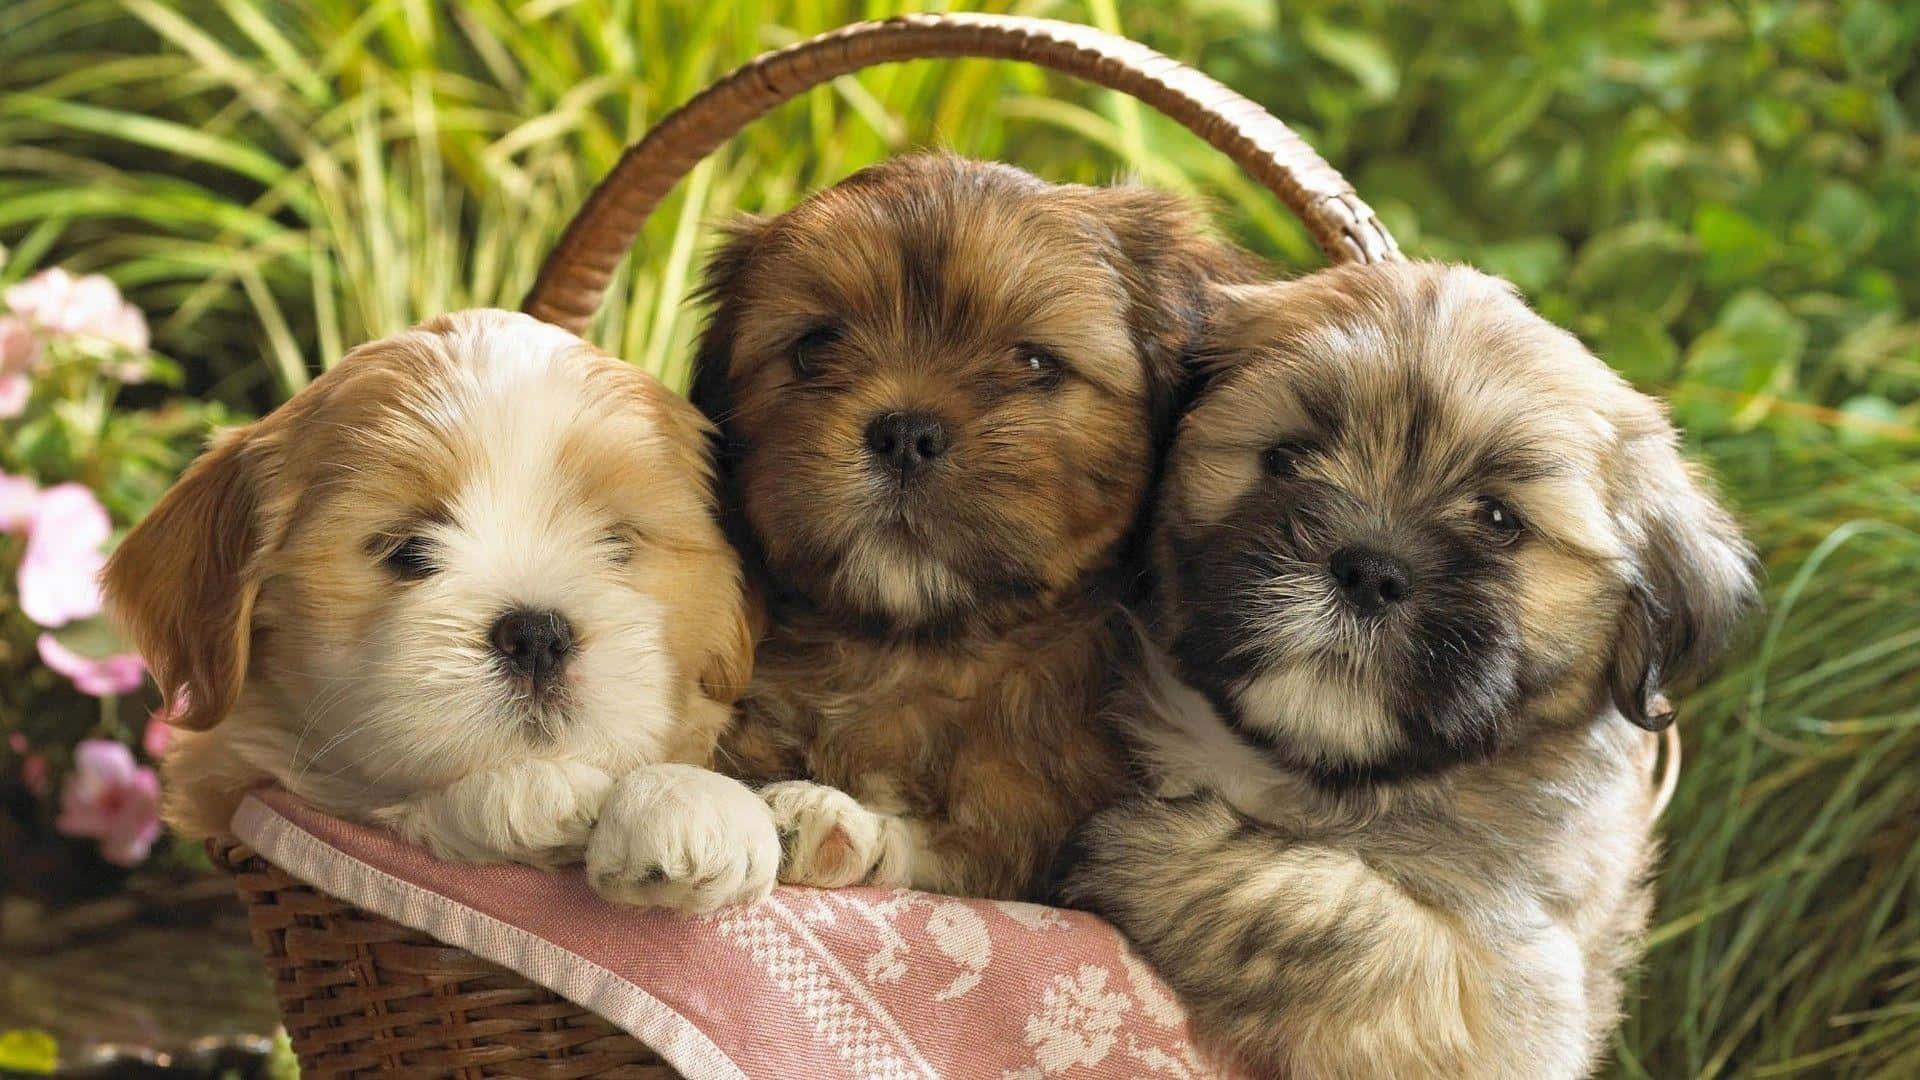 three small dogs in a basket